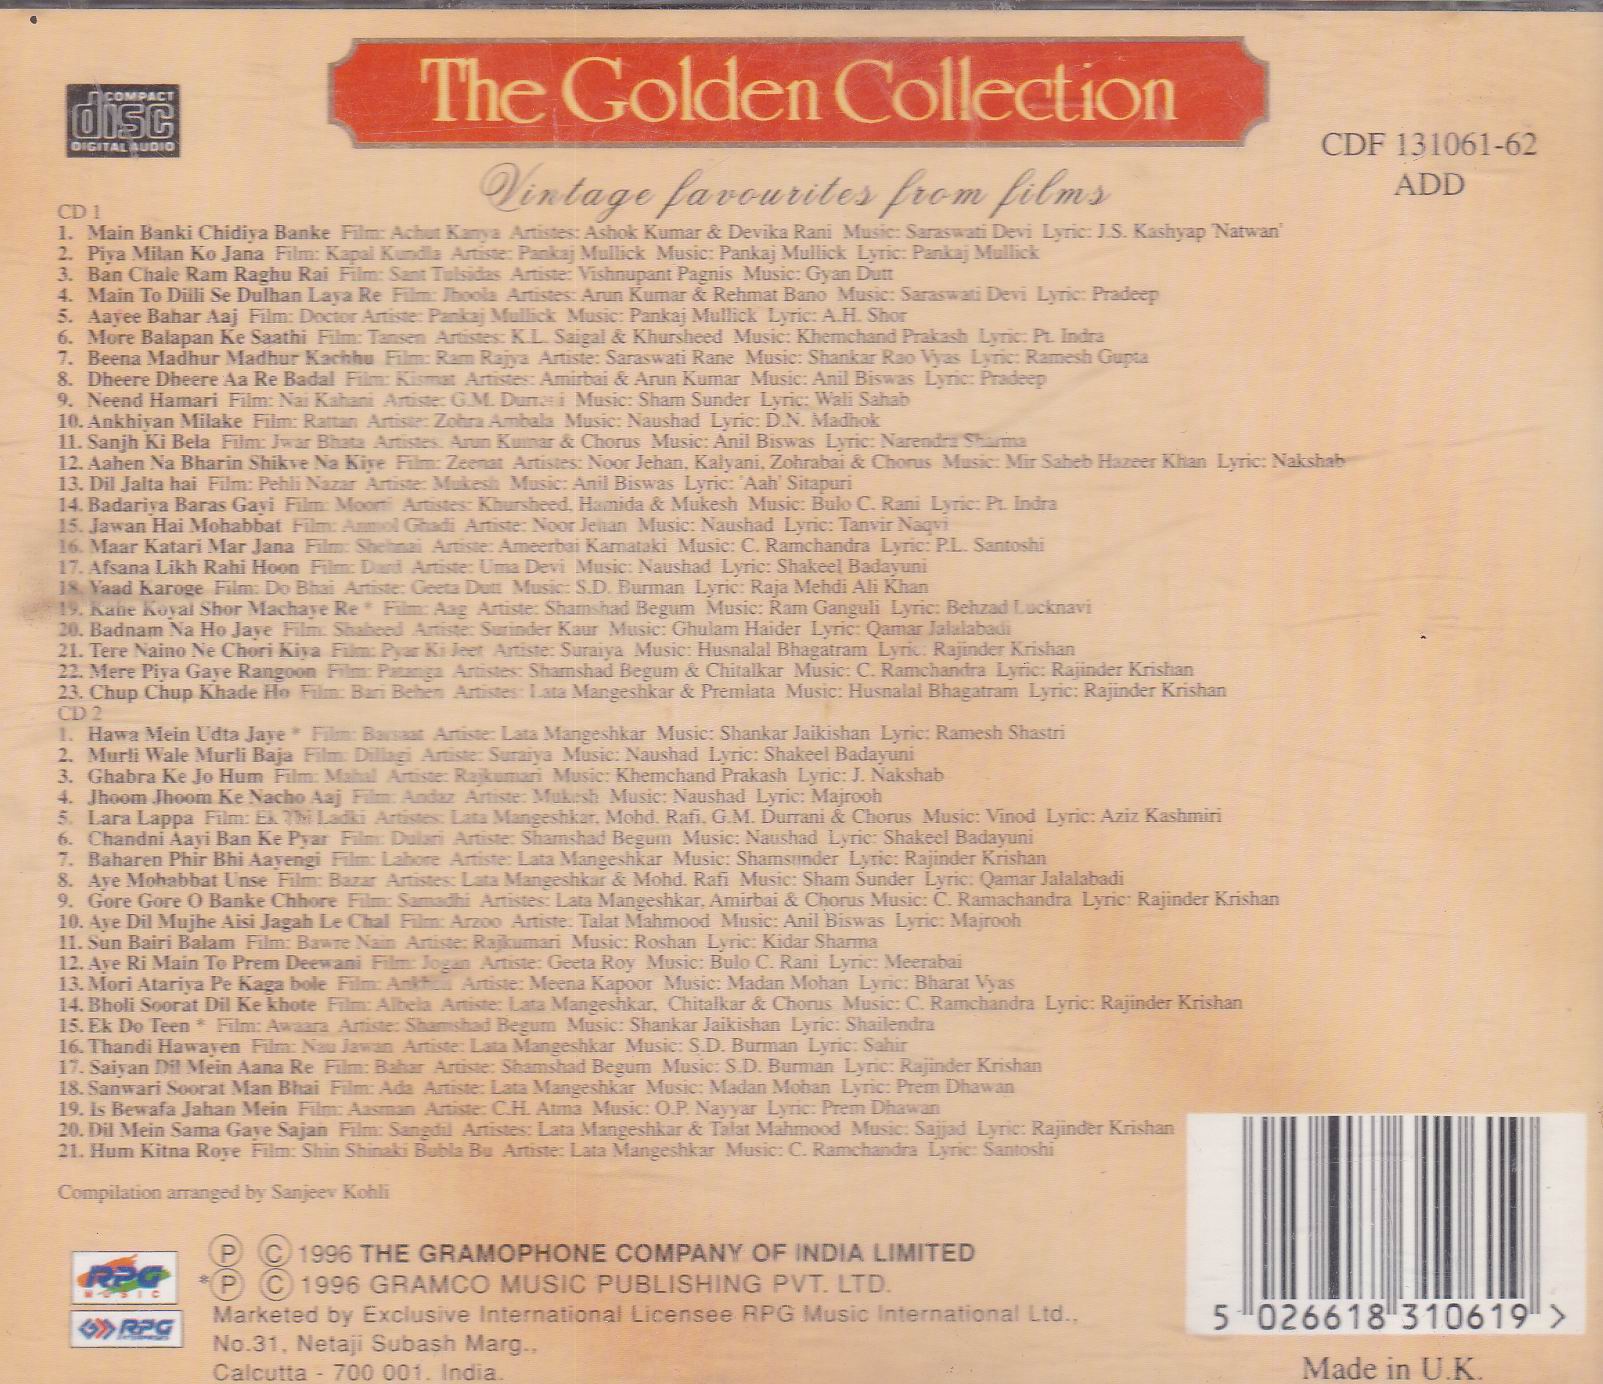 The Golden Collection Vintage Favourites From Films EMI Cd - Click Image to Close